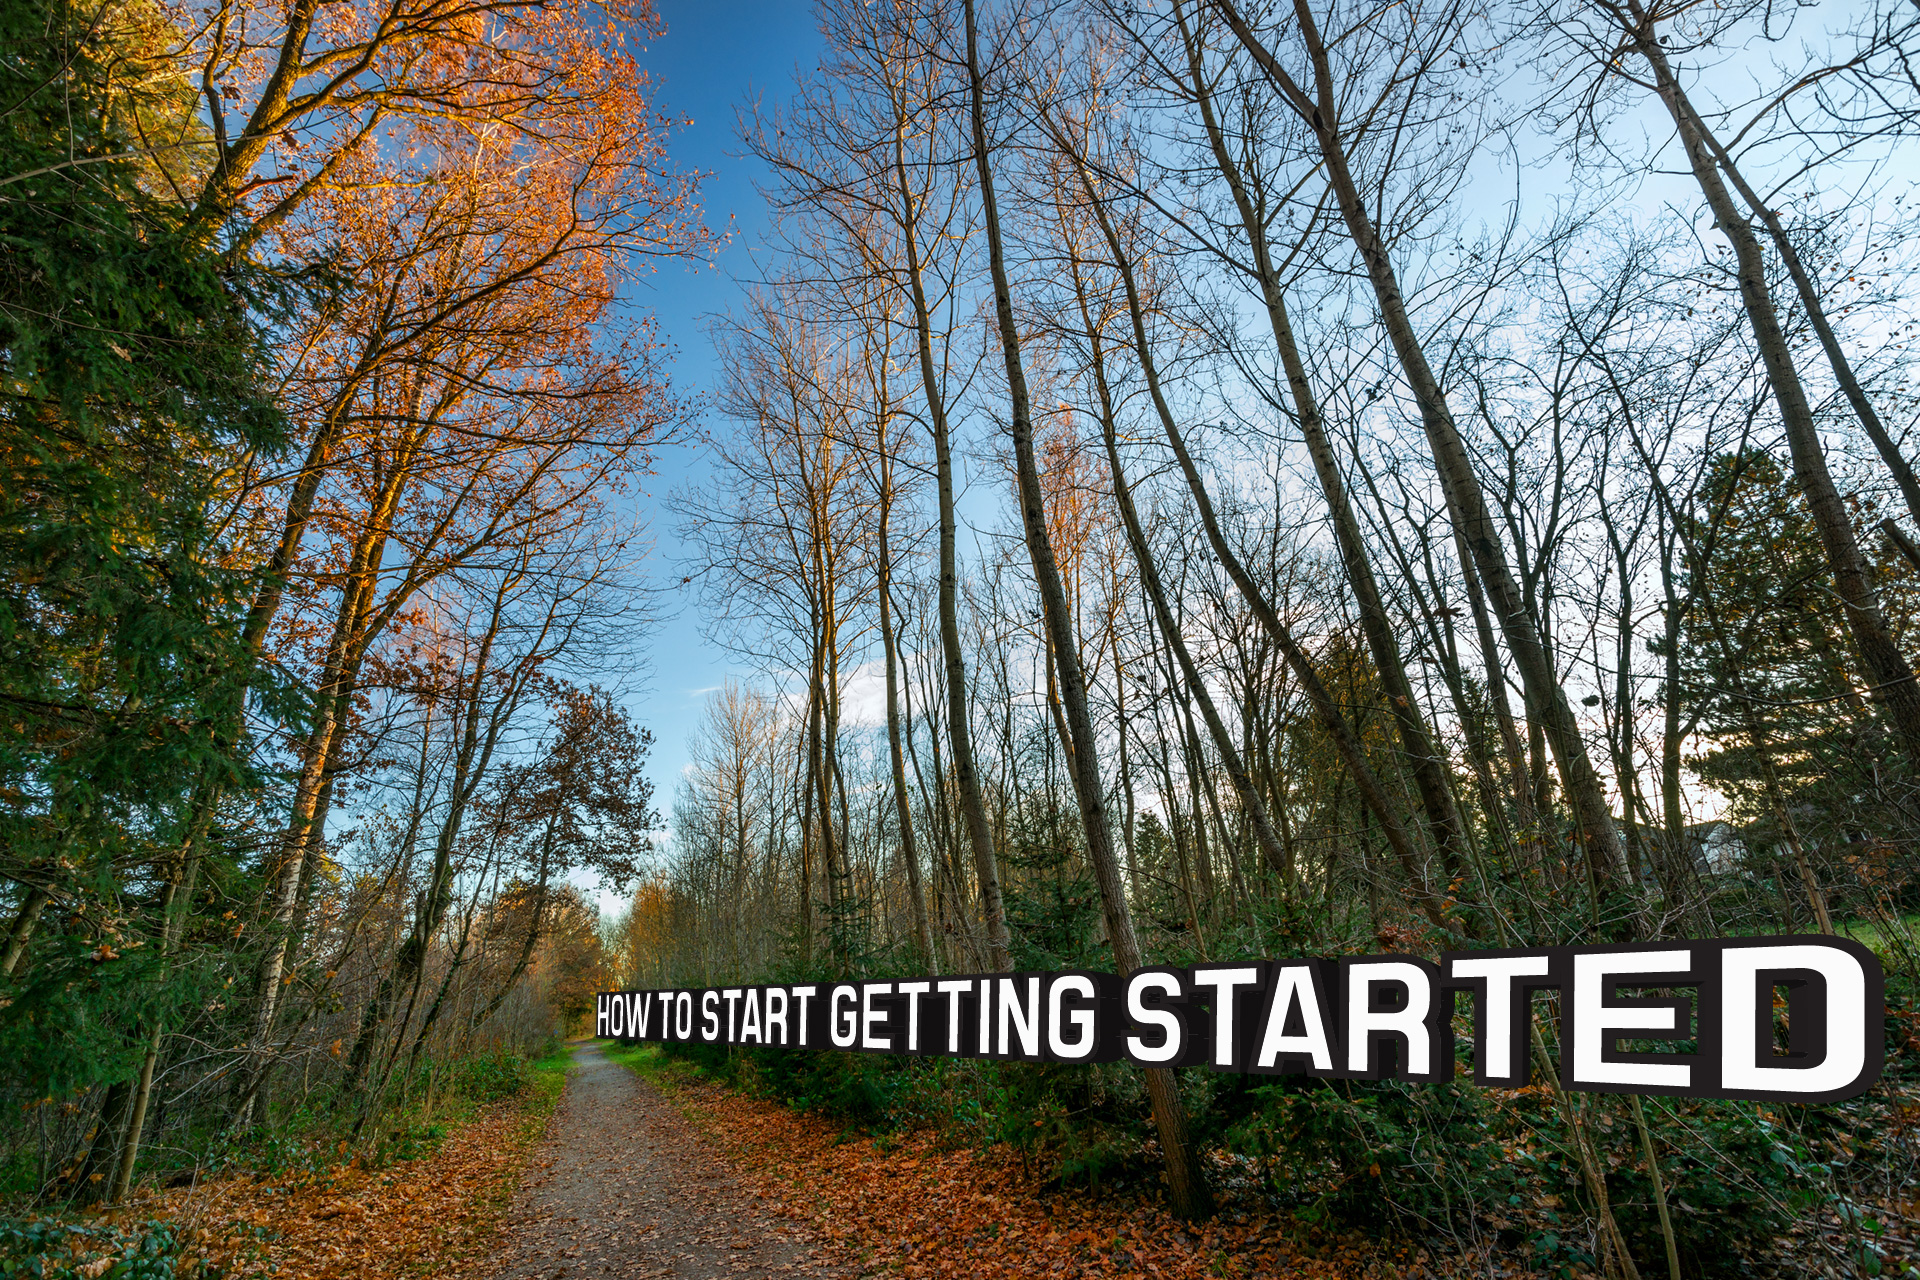 How to Start Getting Started